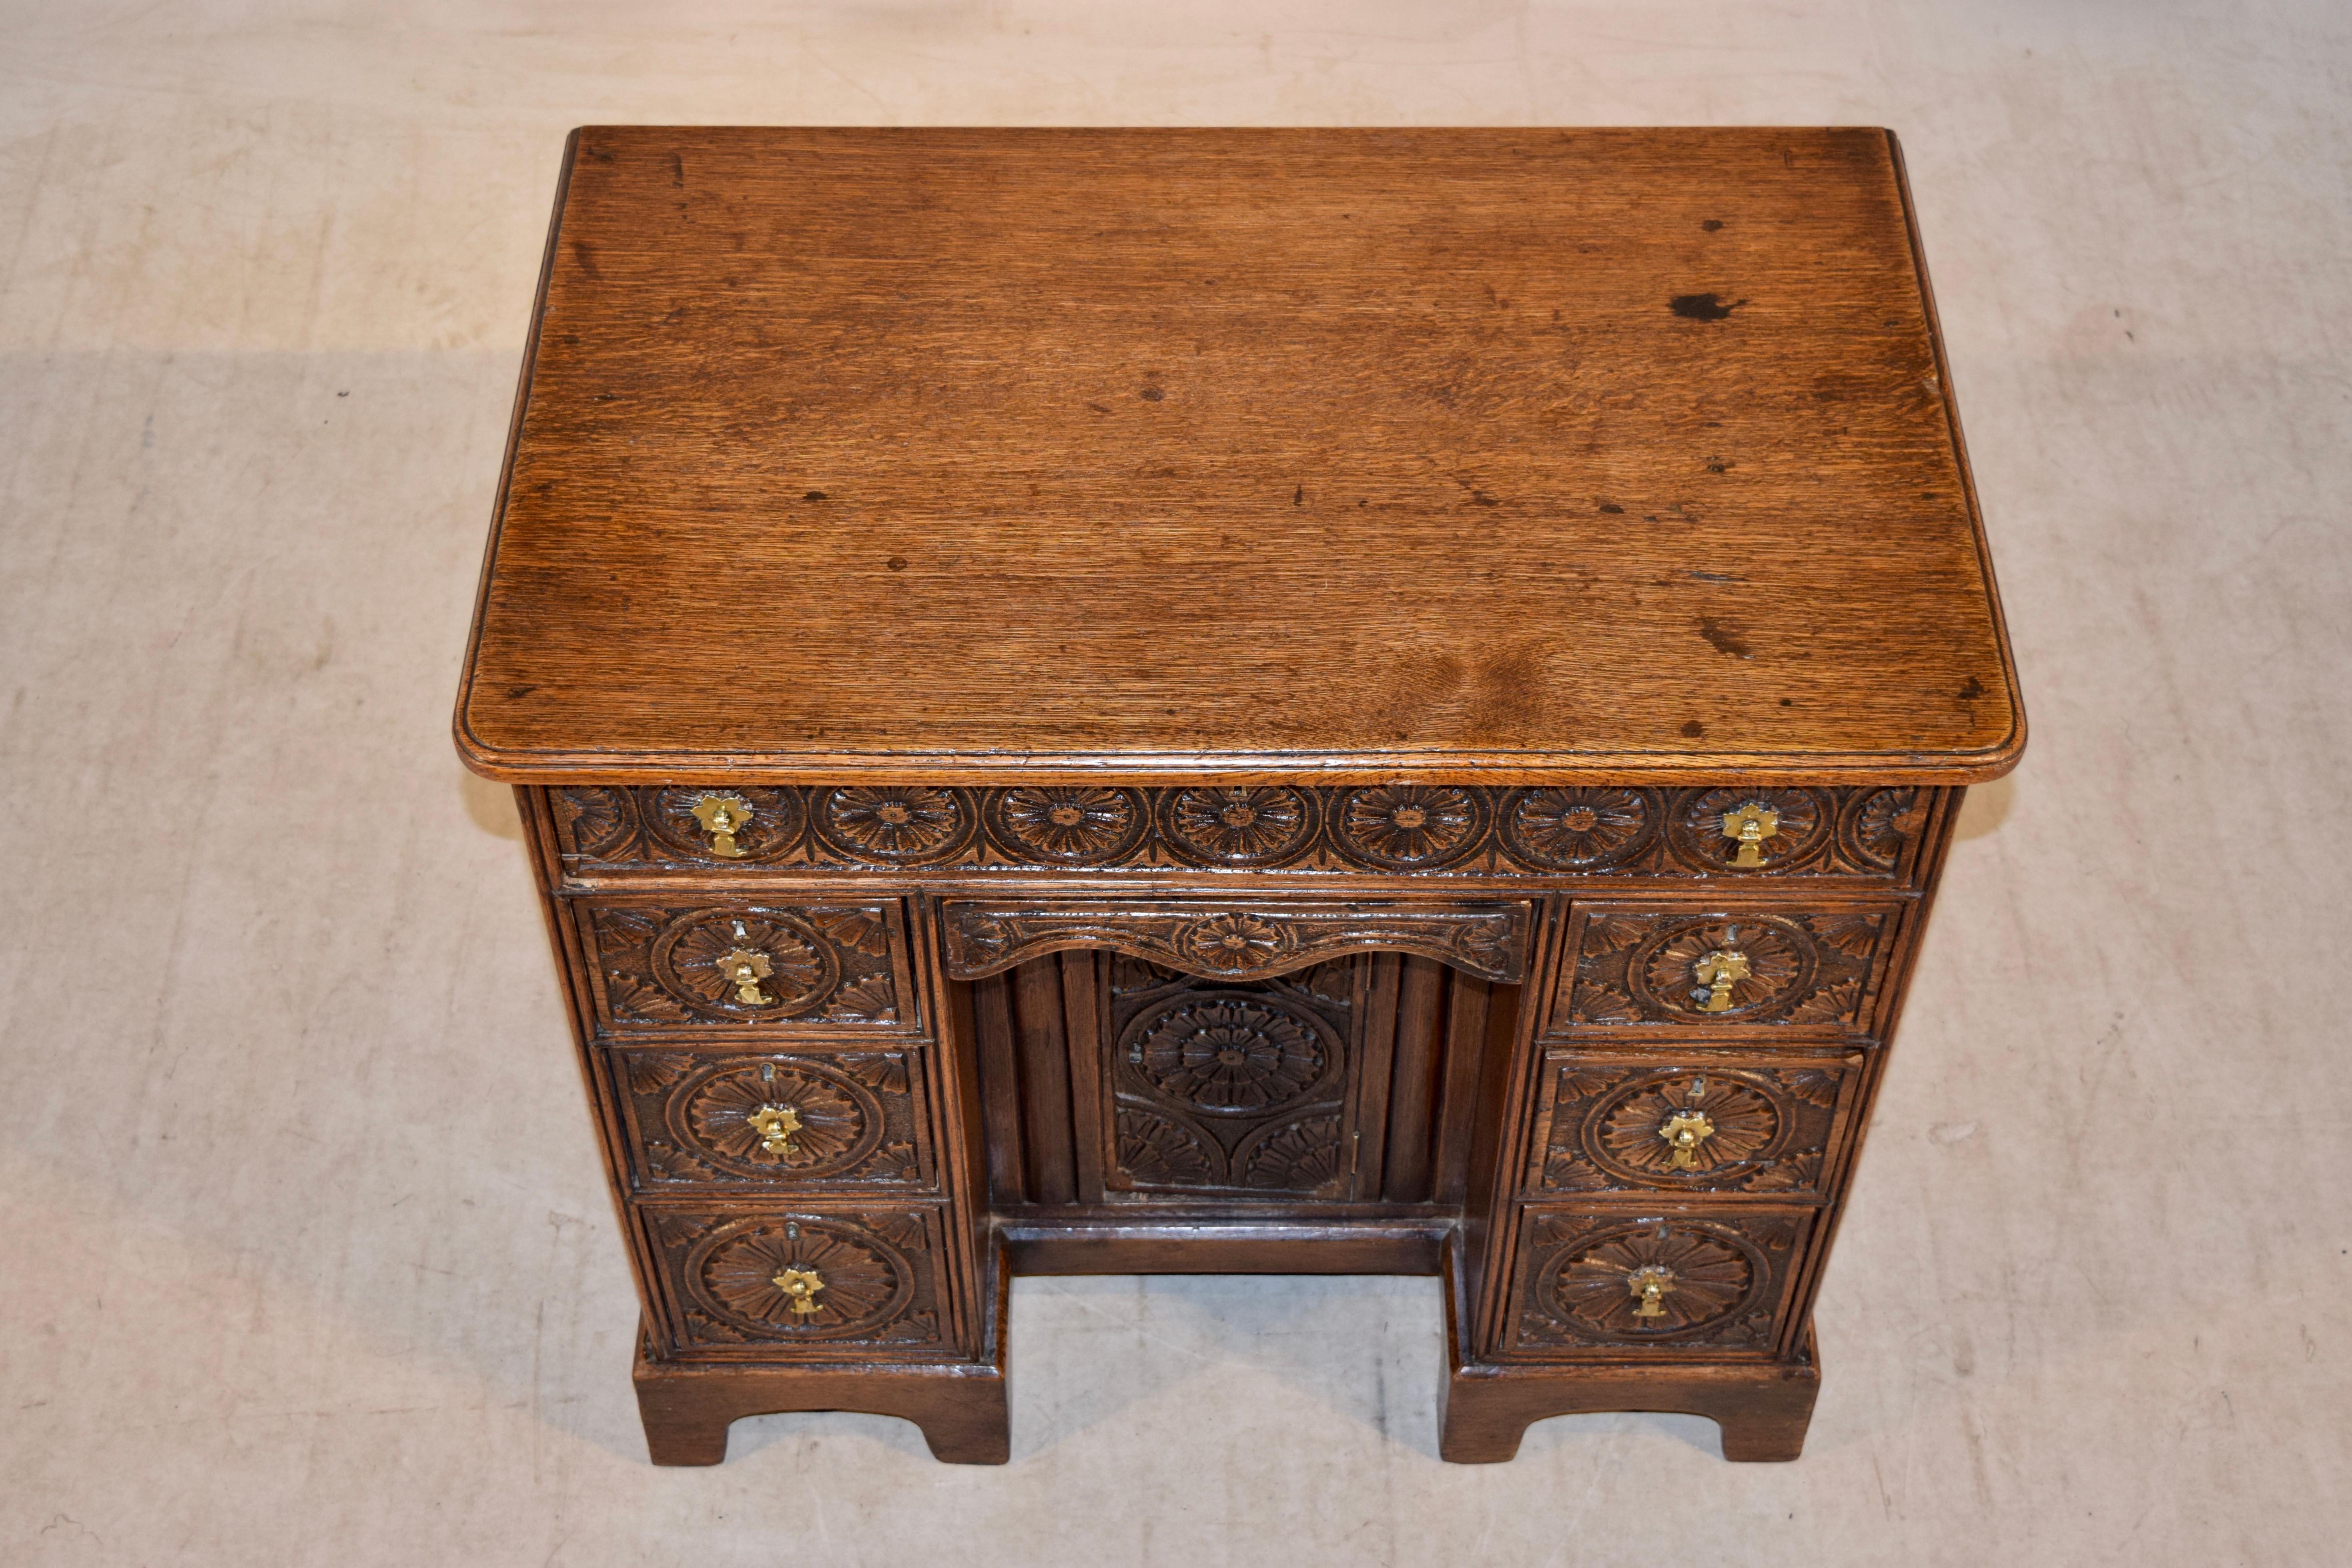 Hand-Carved 19th Century English Knee Hole Desk For Sale